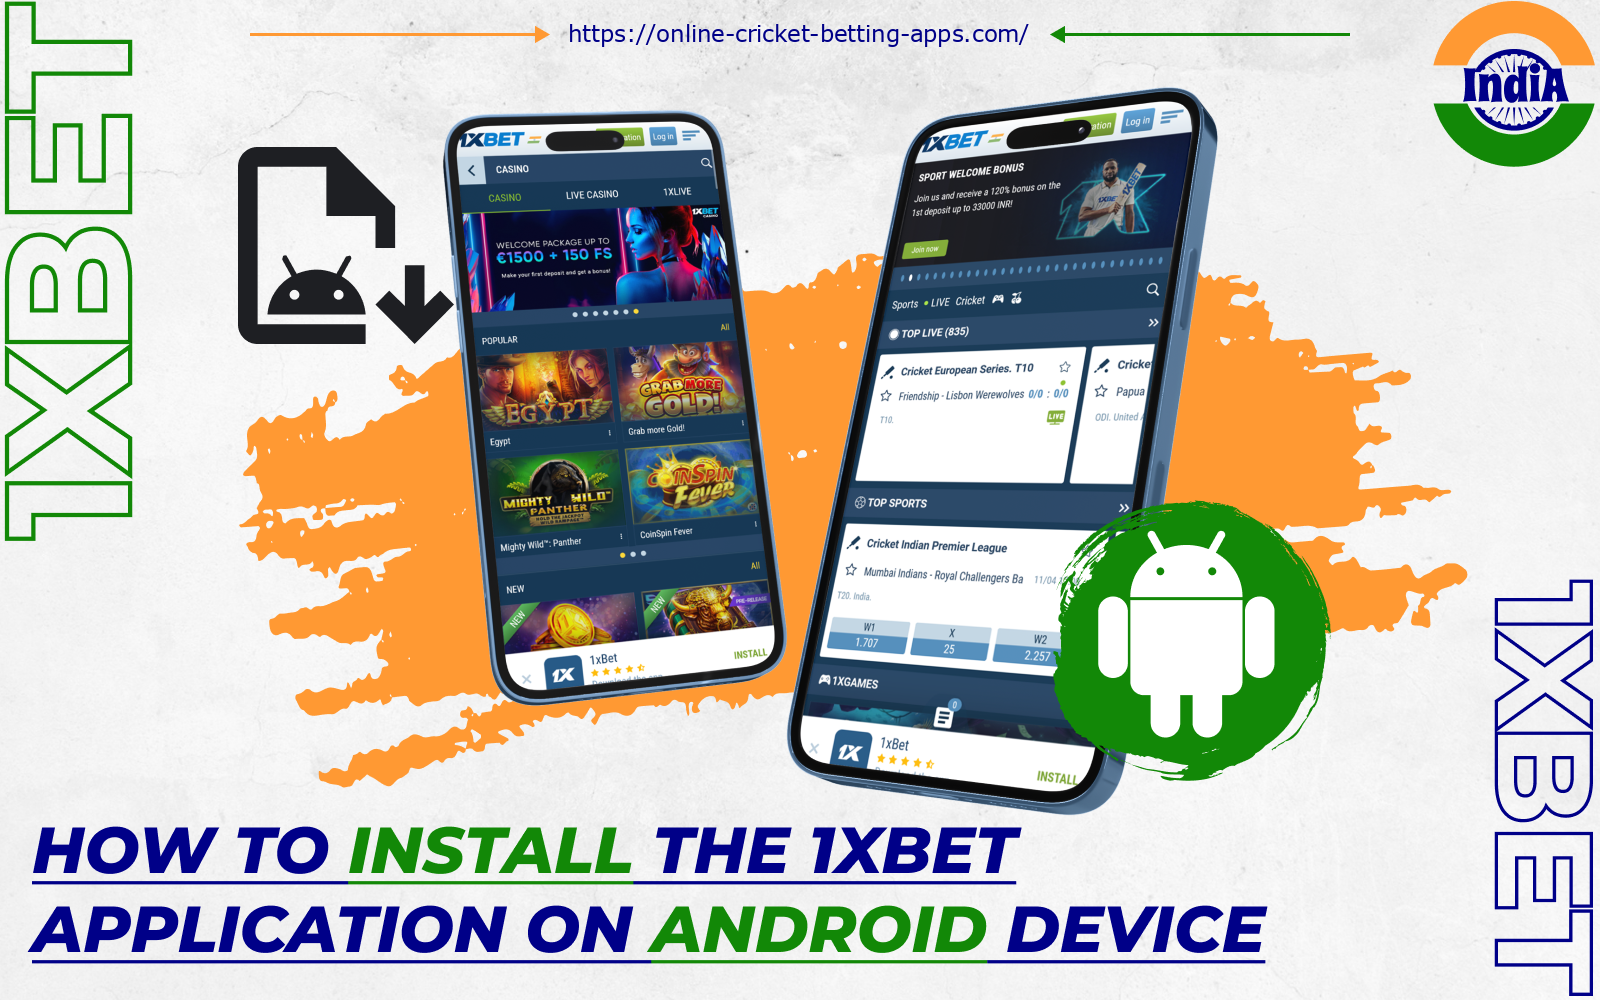 After installing the 1xBet Android app, players from India will have access to all casino features